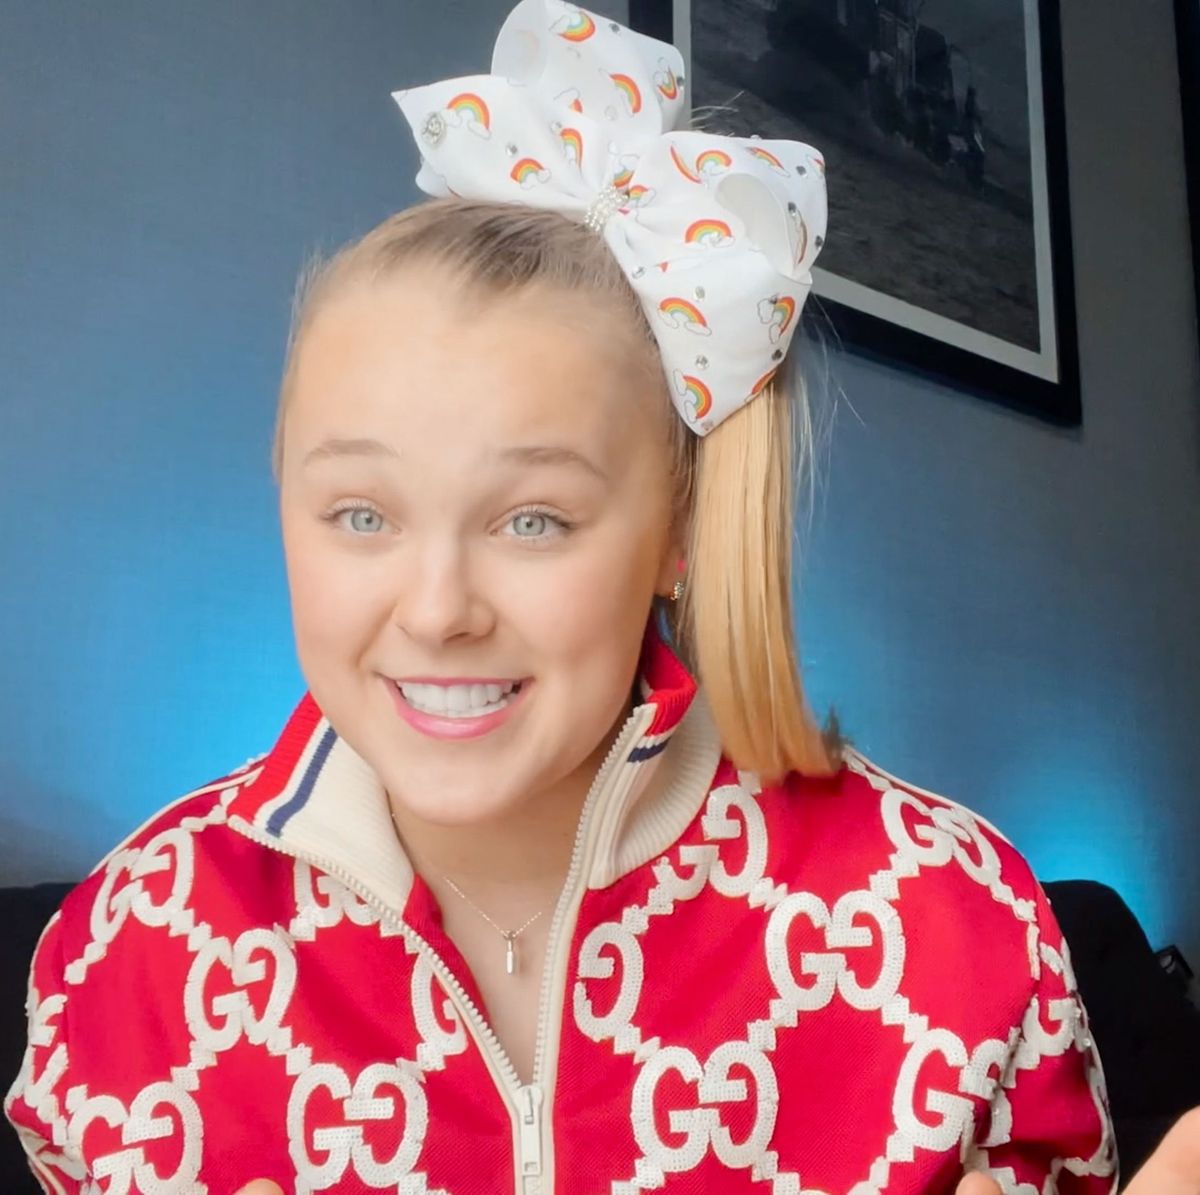 JoJo Siwa Takes Down Her Ponytail and Reveals Gorgeous Waves in